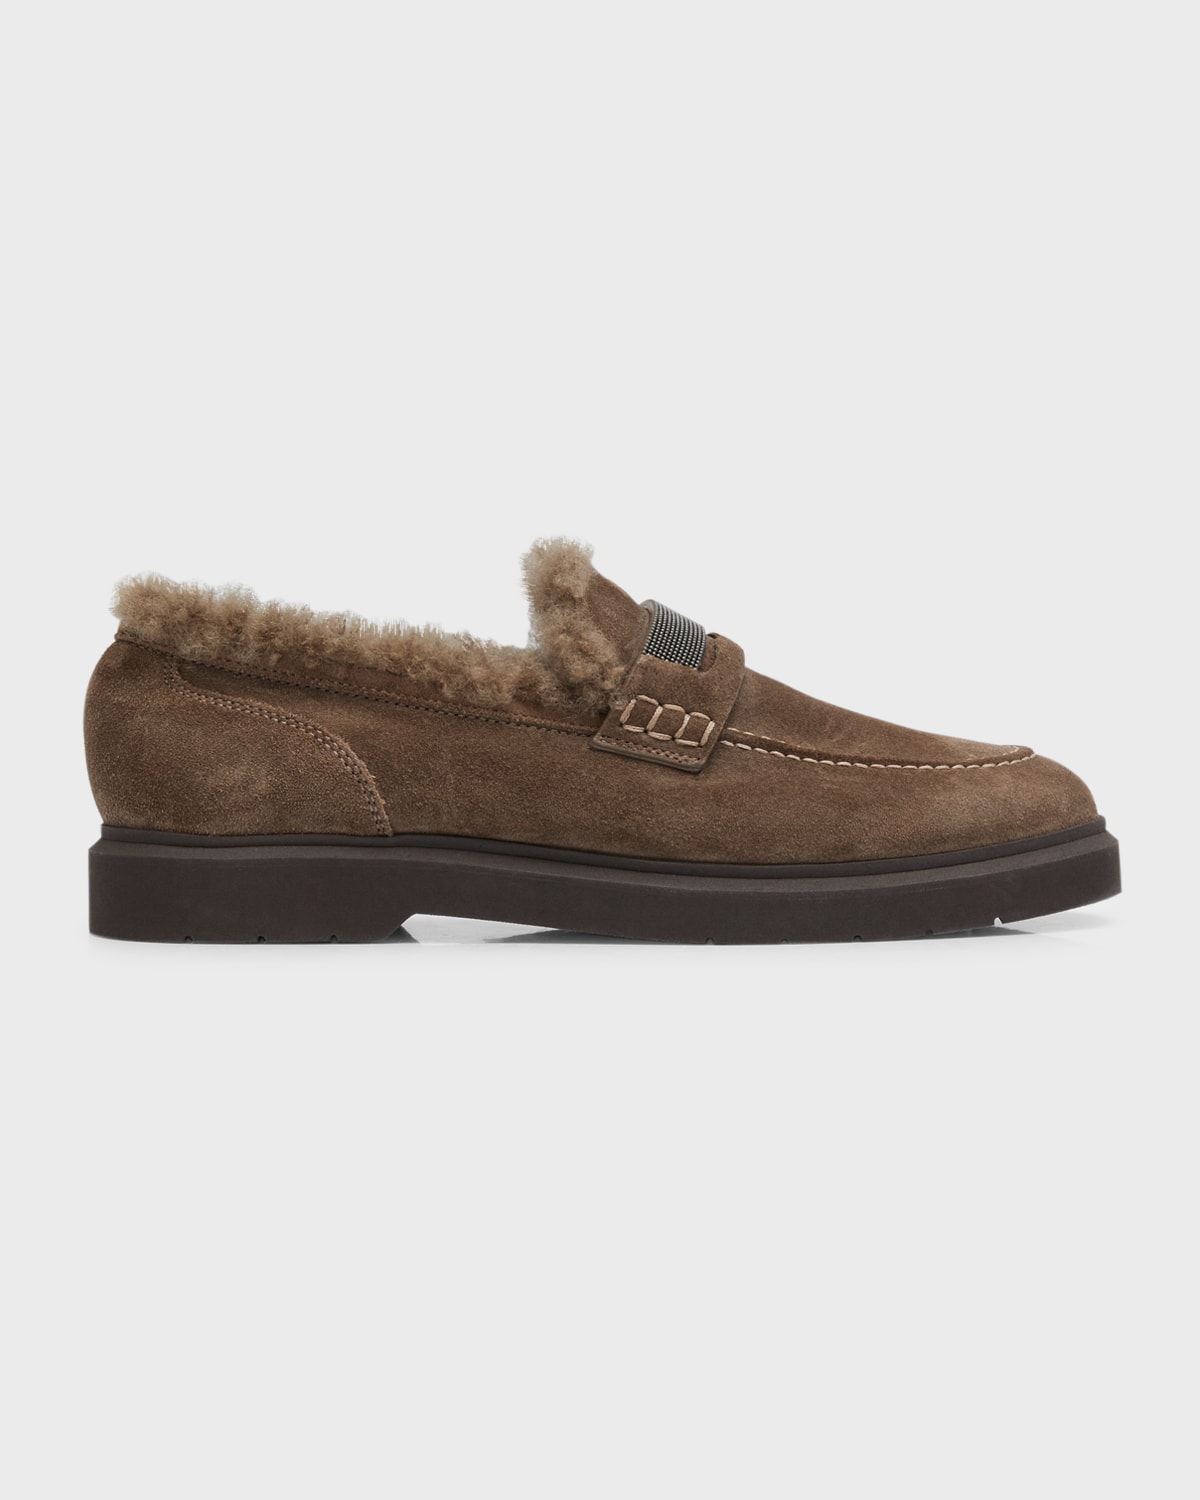 BRUNELLO CUCINELLI SUEDE SHEARLING PENNY LOAFERS